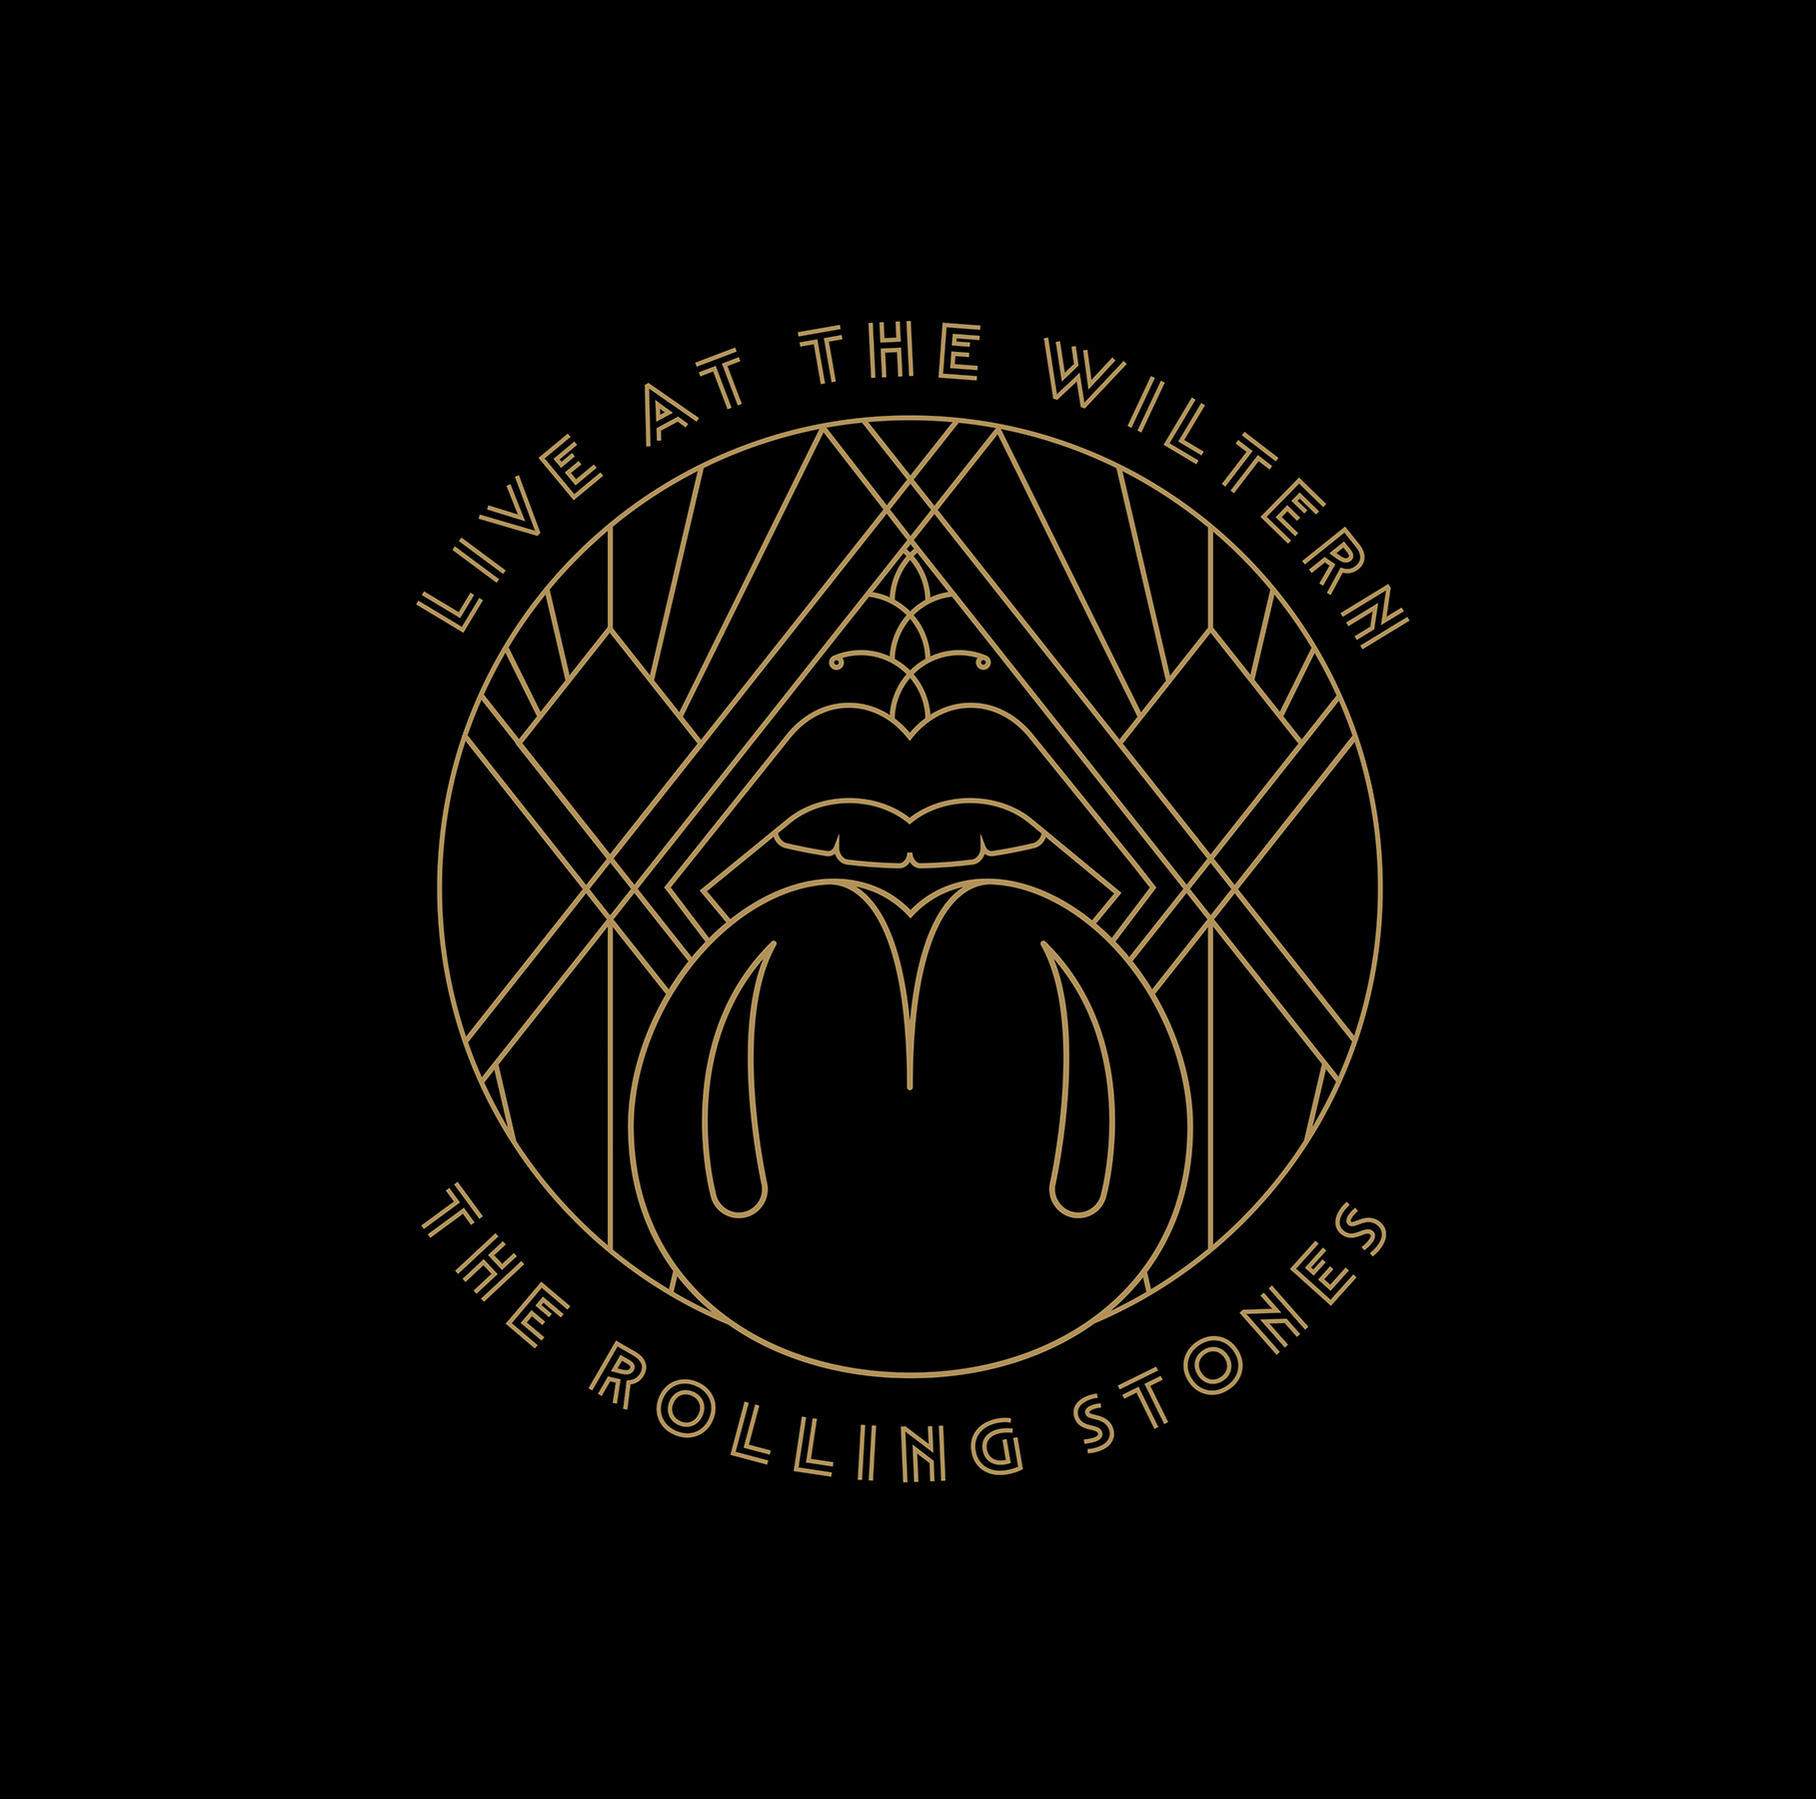 The Rolling Stones - Live the (Vinyl) Wiltern Angeles / - (Los at 3LP)